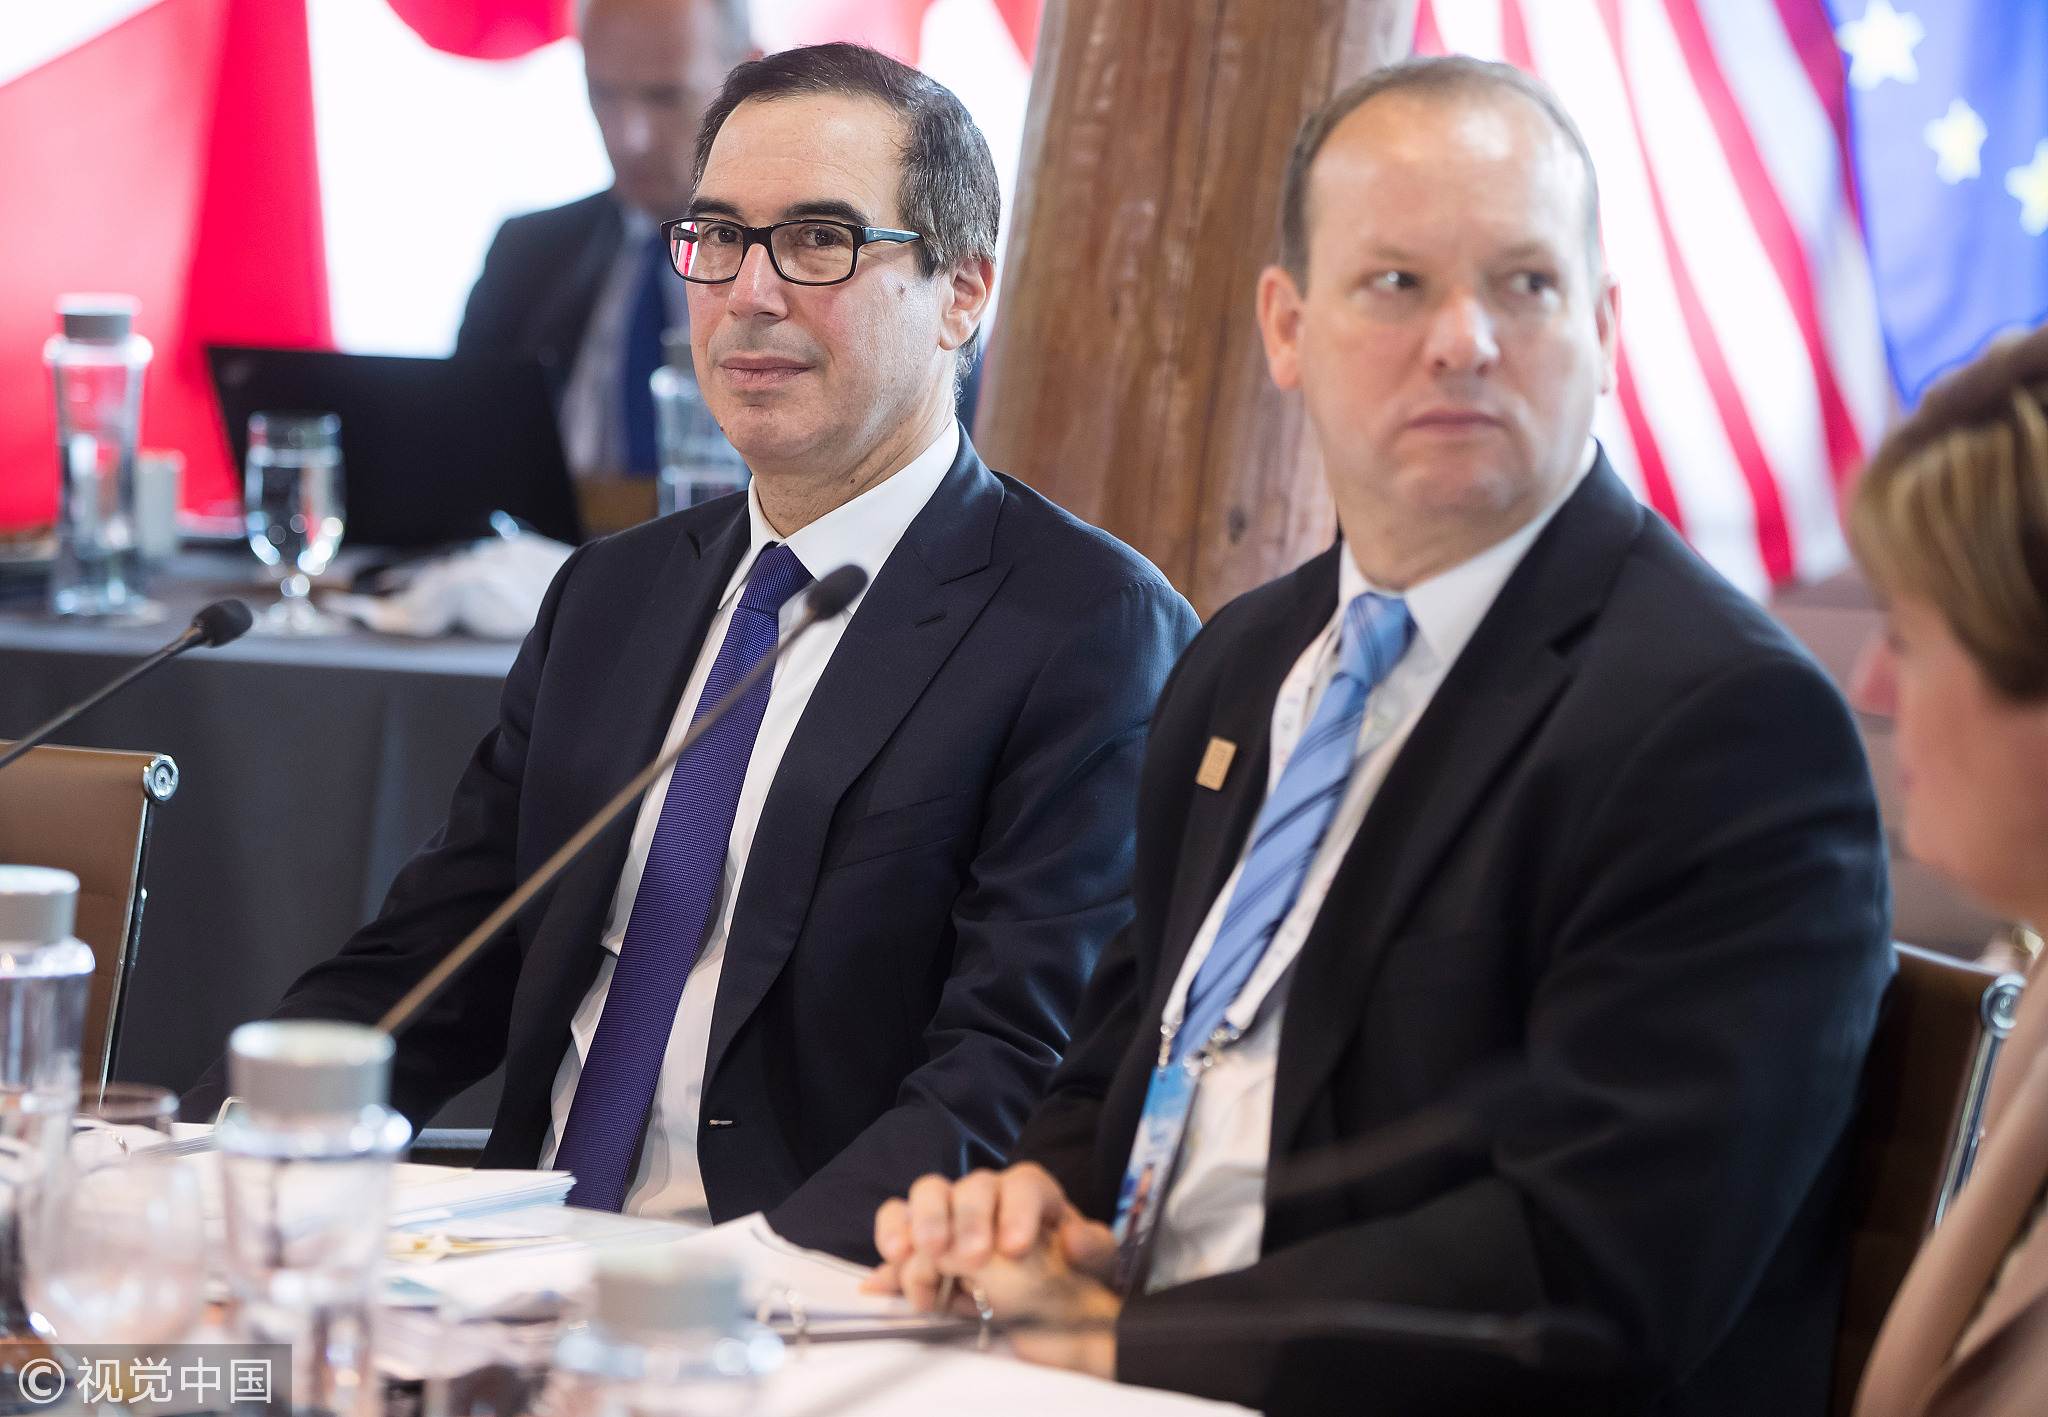 Steven Mnuchin, US Treasury secretary, left, and David Moore, acting deputy administrator of USAID, listen during the G7 finance ministers and central bank governors meeting in Whistler, British Columbia, Canada, on Friday, June 1, 2018. [Photo: VCG]